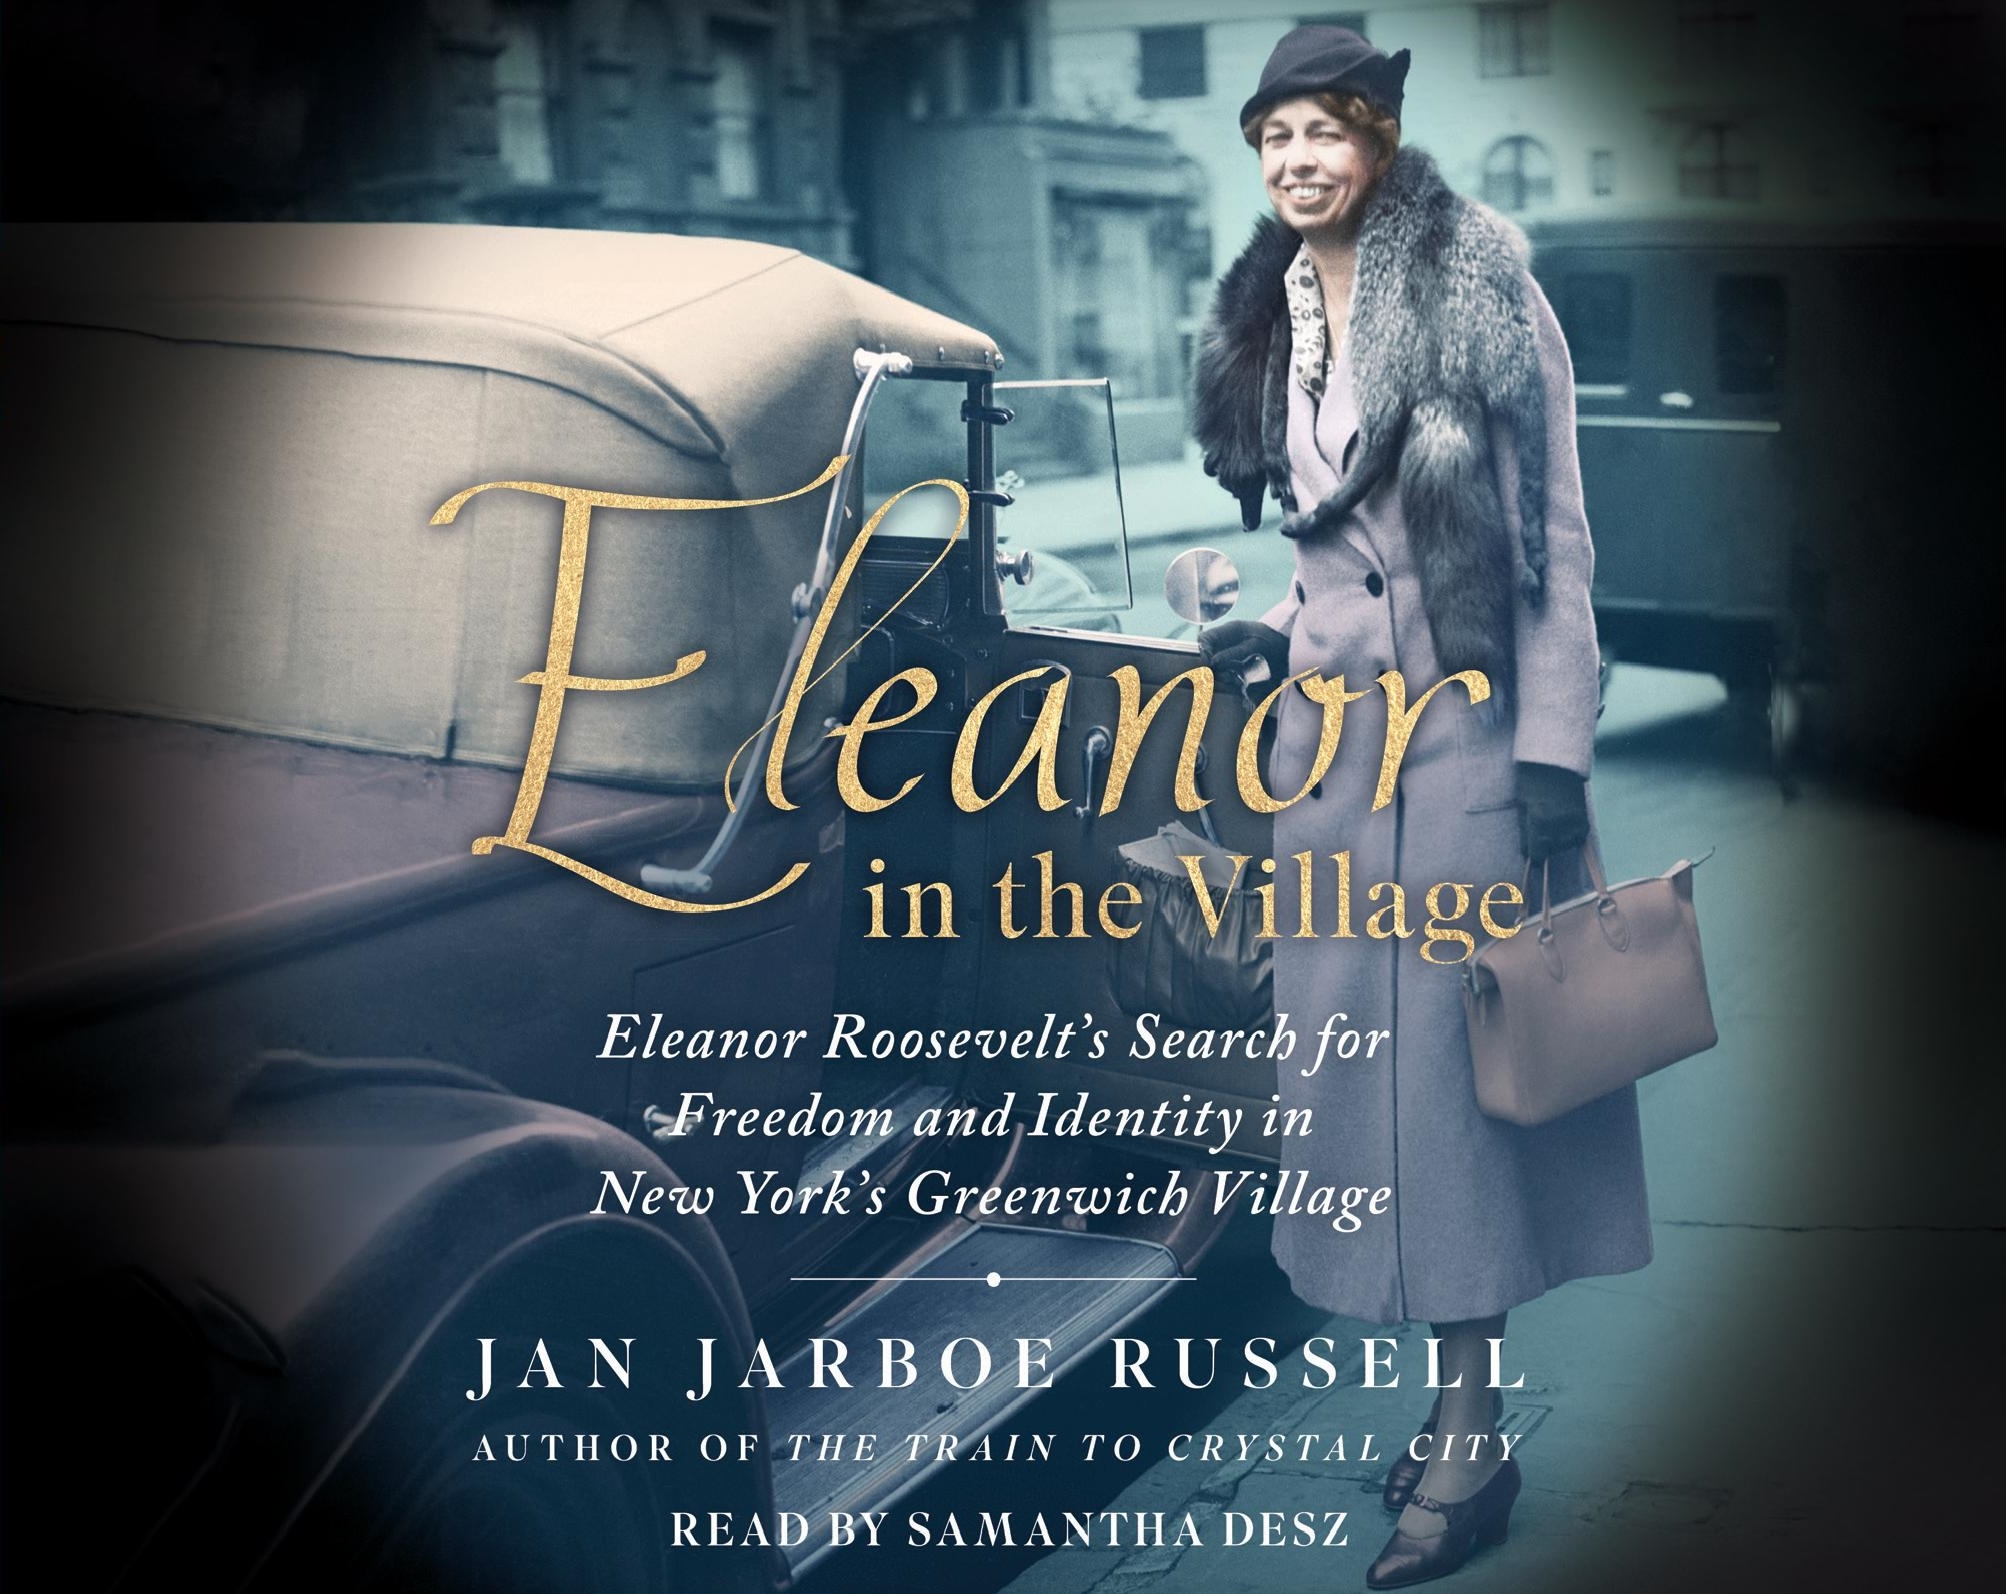 Image for "Eleanor in the Village : Eleanor Roosevelt's search for freedom and identity in New York's Greenwich Village"